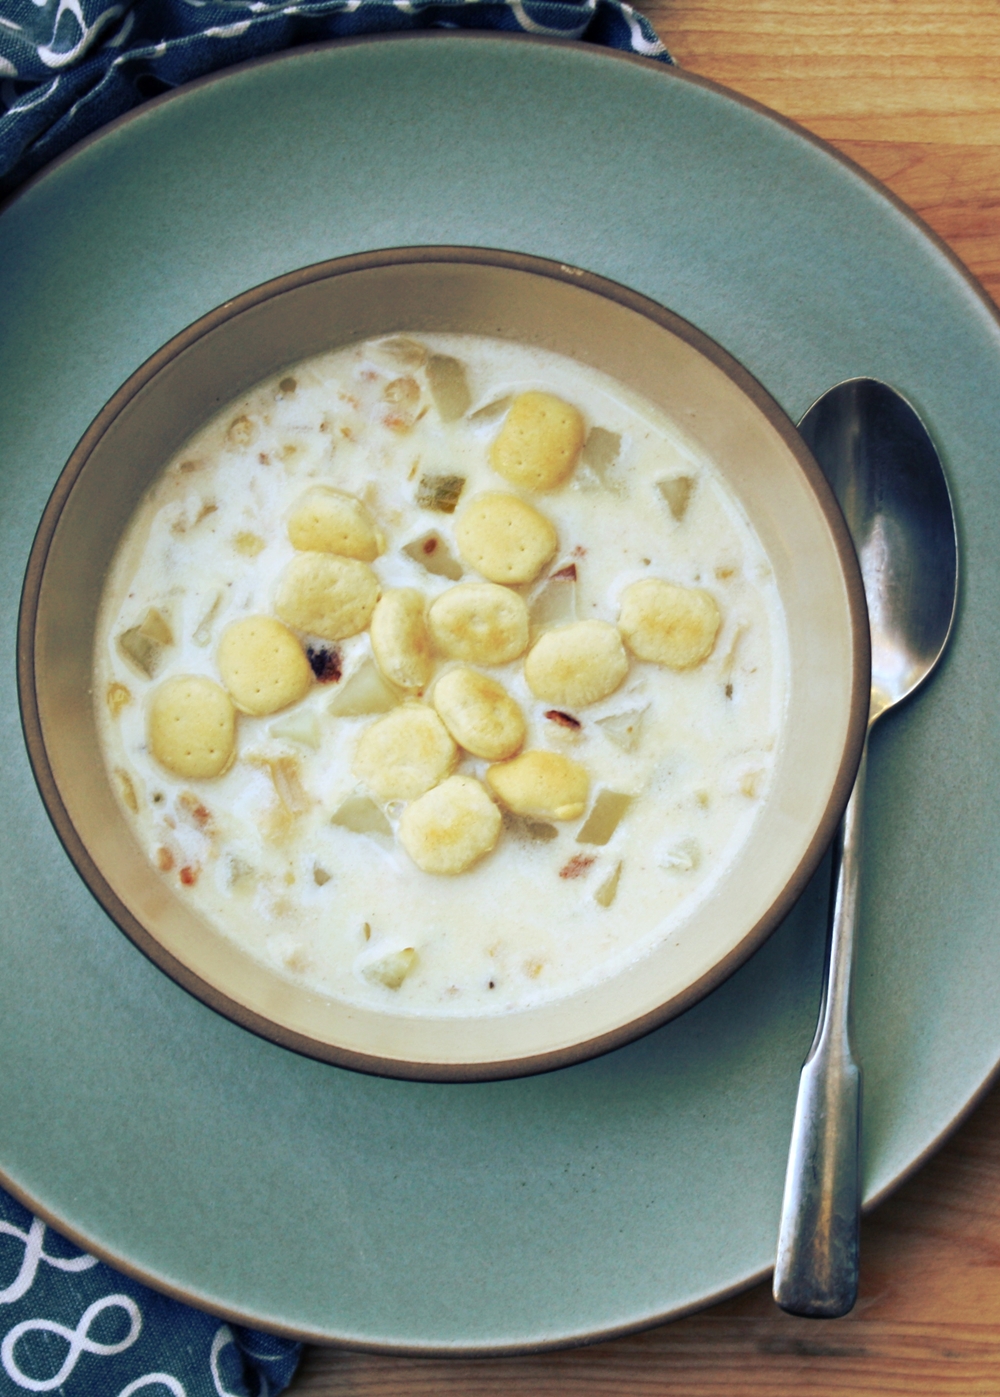 How to Make Clam Chowder